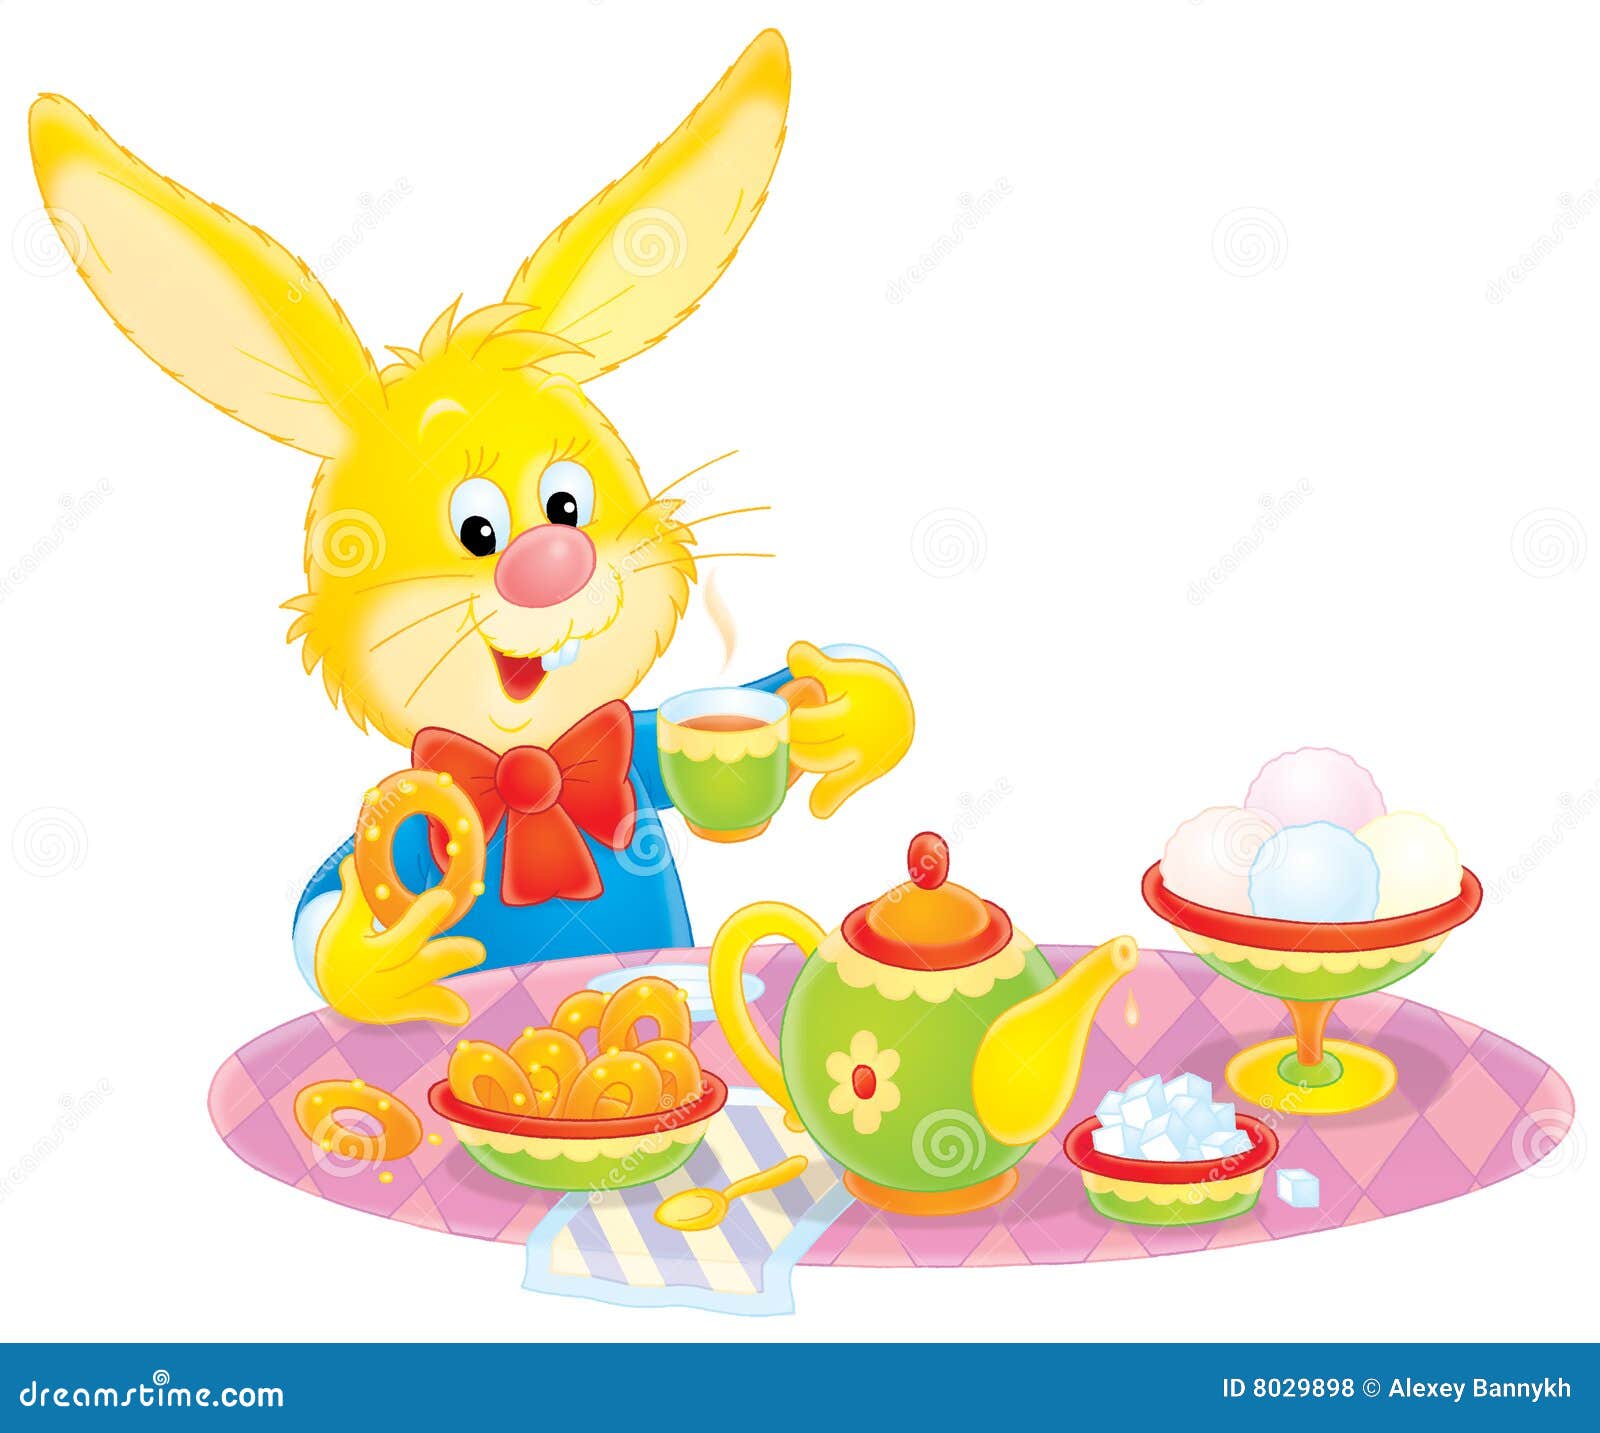 royalty free easter clip art - photo #31